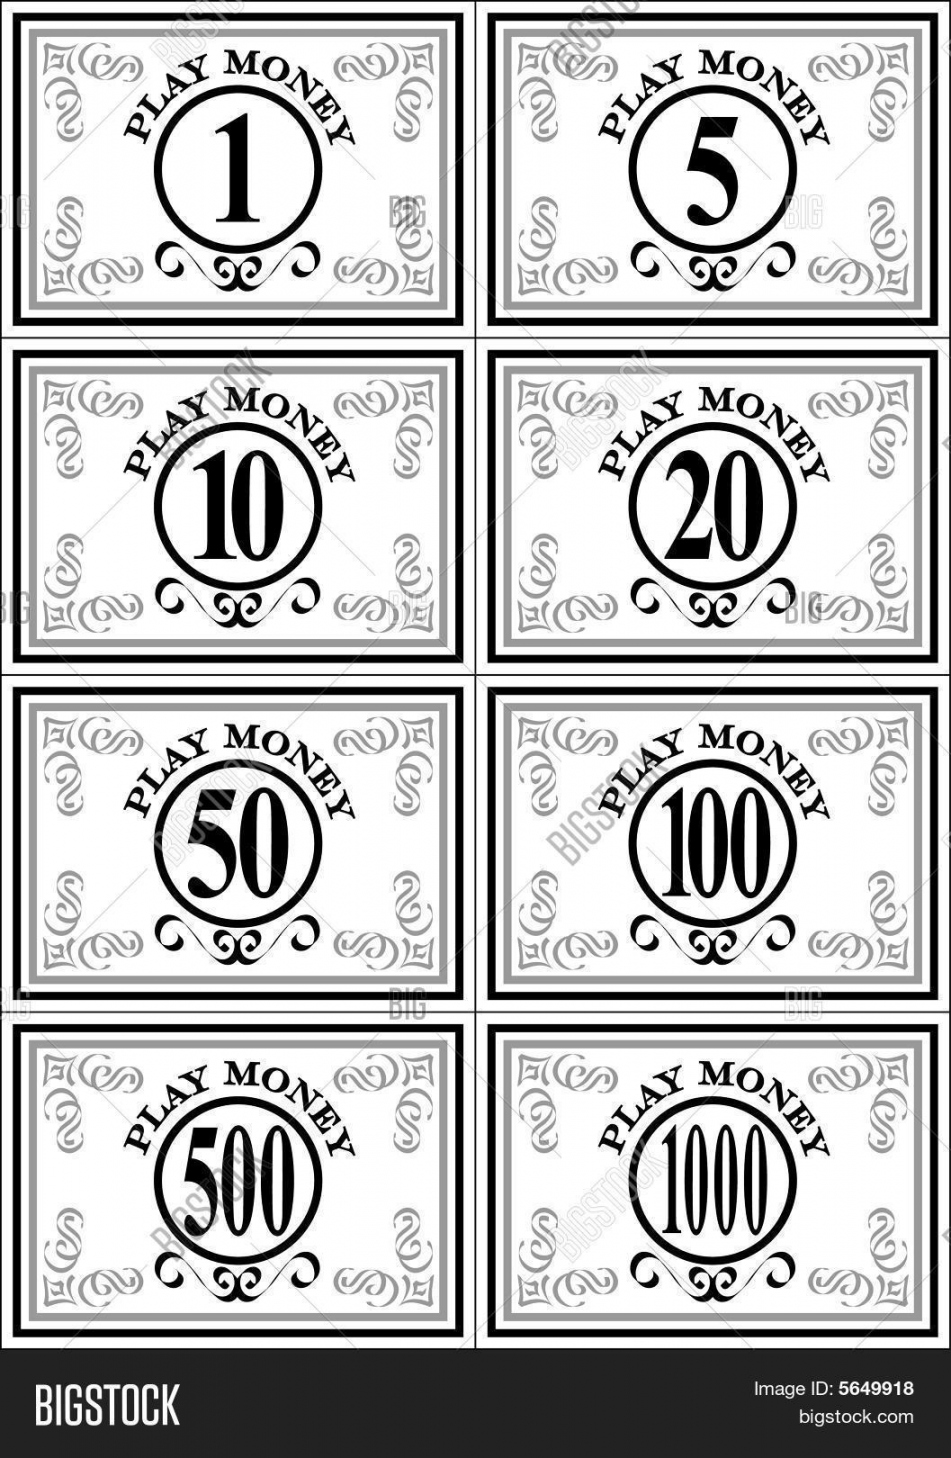 Play Money Vector & Photo (Free Trial)  Bigstock - FREE Printables - Free Printable Printable Play Money Black And White